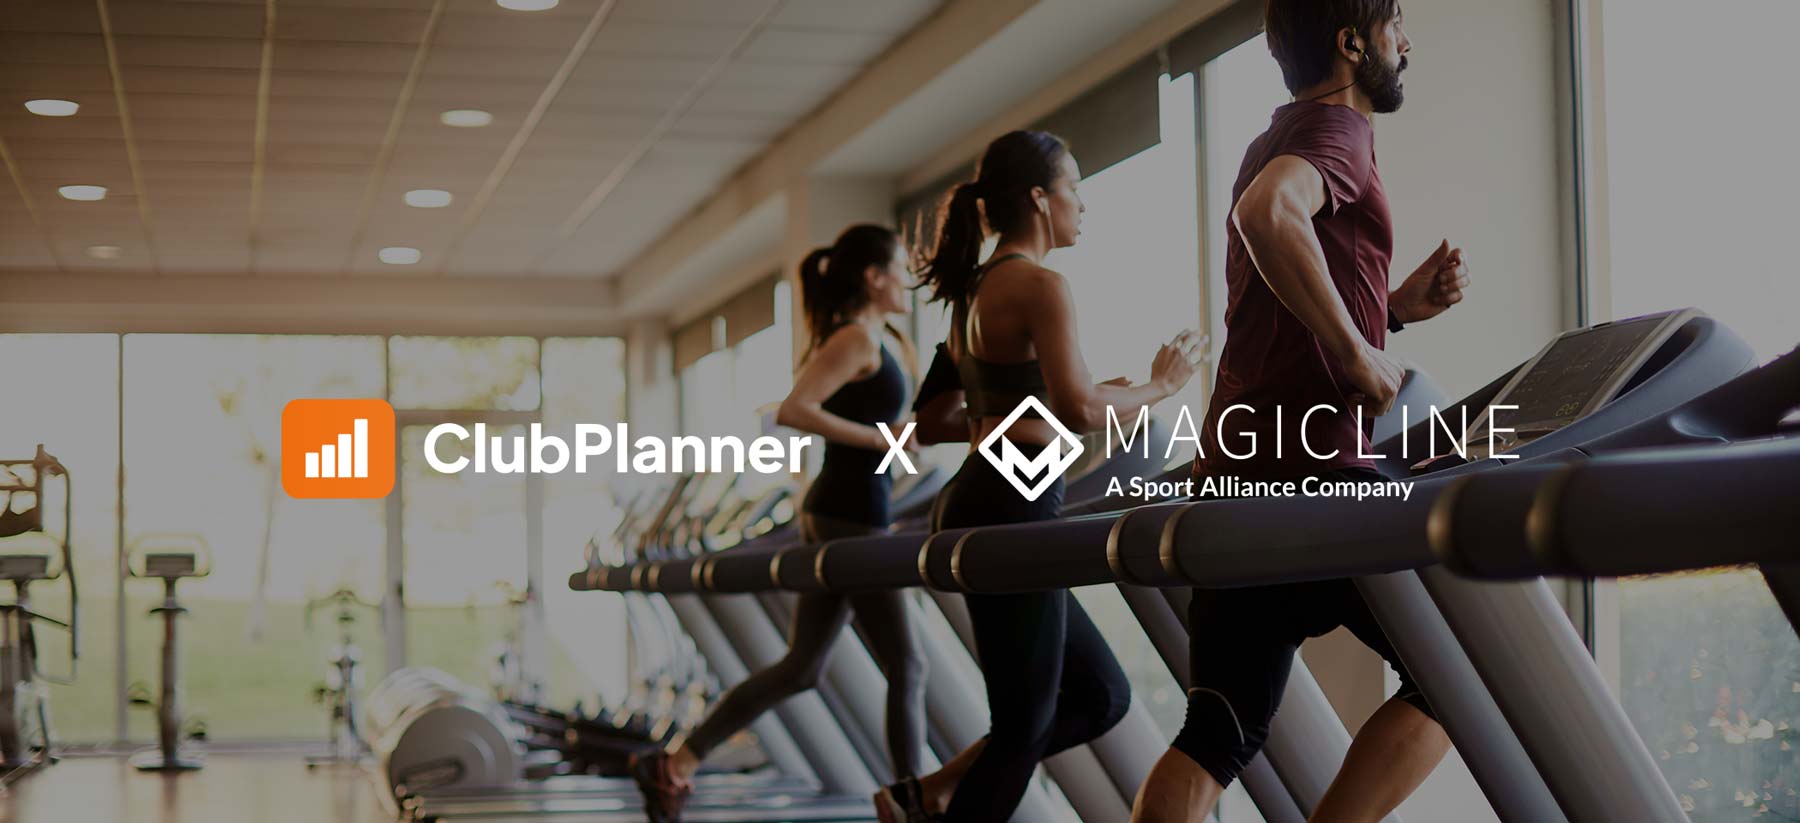 Magicline and ClubPlanner enter strategic cooperation: customers benefit from seamless integration